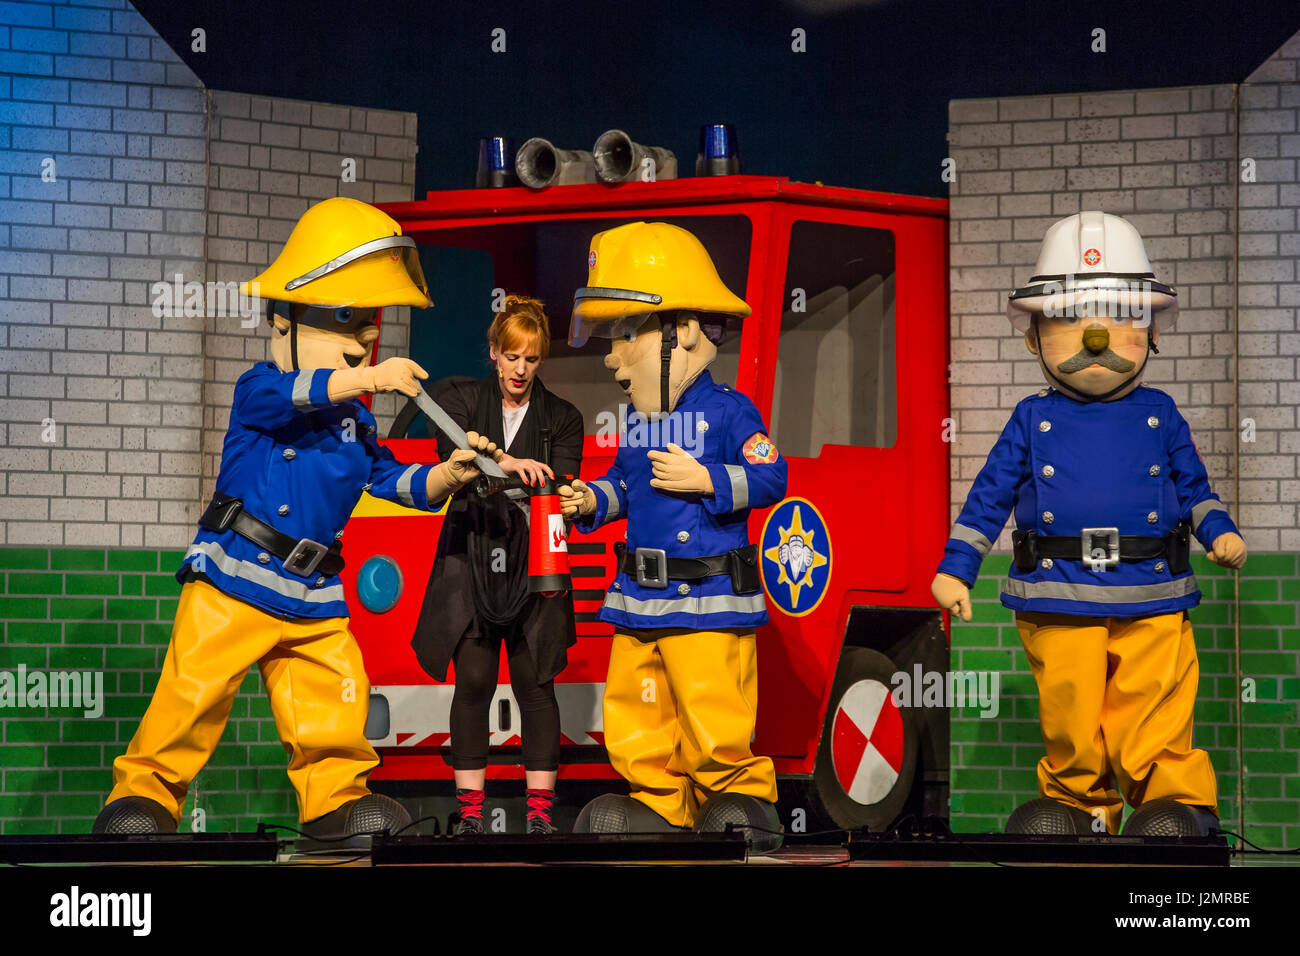 Wetzlar, Germany. 27th April, 2017. Feuerwehrmann Sam Live: Pontypandy rockt!, German children's theater adaptation of Welsh-British animated comedy children's television series fireman Sam by Theater auf Tour Darmstadt/Germany (in cooperation with Van Hoorne Entertainment, Netherlands). Performance at Stadthalle Wetzlar. Characters in scene: Fireman Sam, star guest Sina Singegern (Lisa Parise als real person), Fireman Elvis, Norris Steele (chief of fire service). --- Fotocredit: Christian Lademann Stock Photo